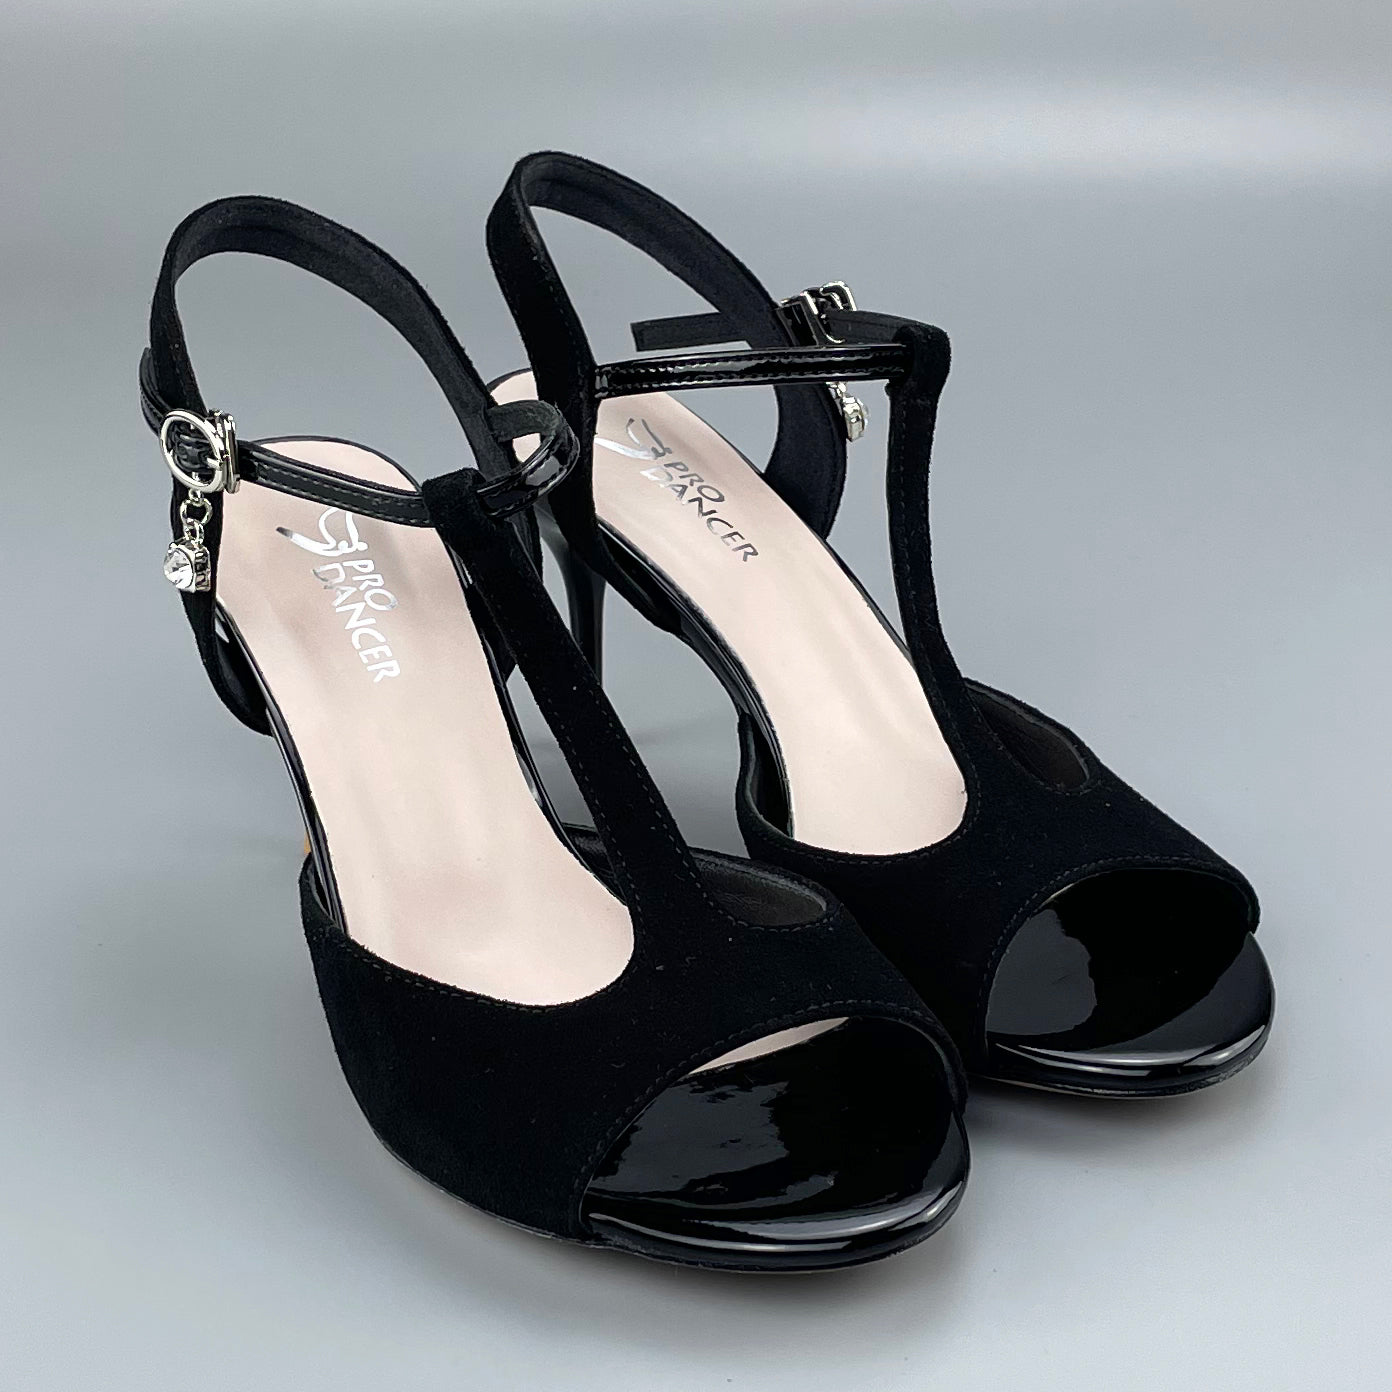 Pro Dancer open-toe and open-back Argentine Tango shoes with high salsa heels and hard leather sole sandals in black (PD-9046A)10